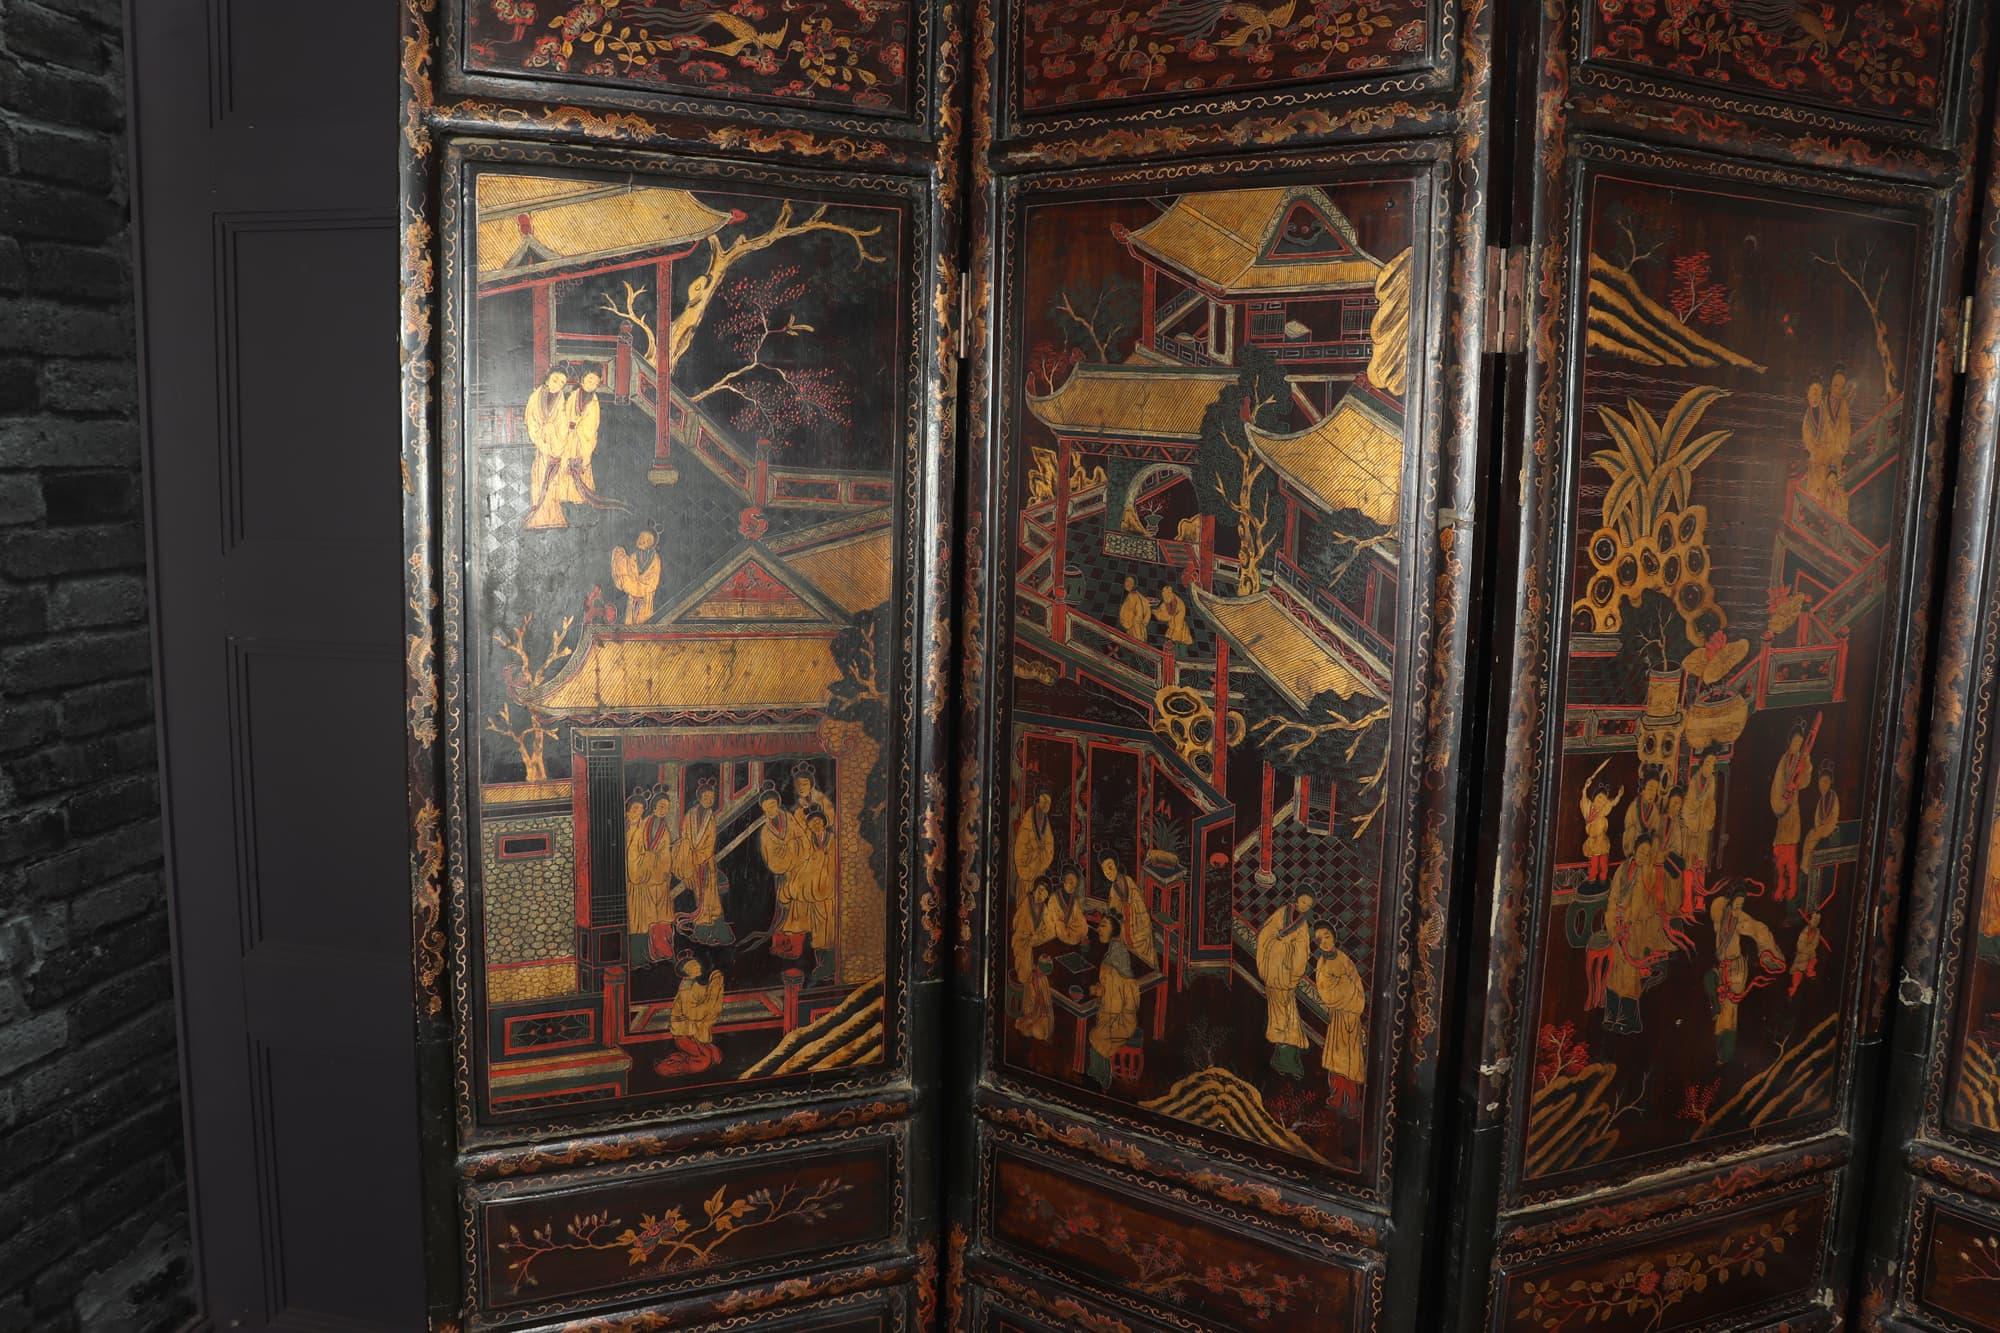 Wood Fine Chinese Export Gilt and Black Lacquer Screen, c1840